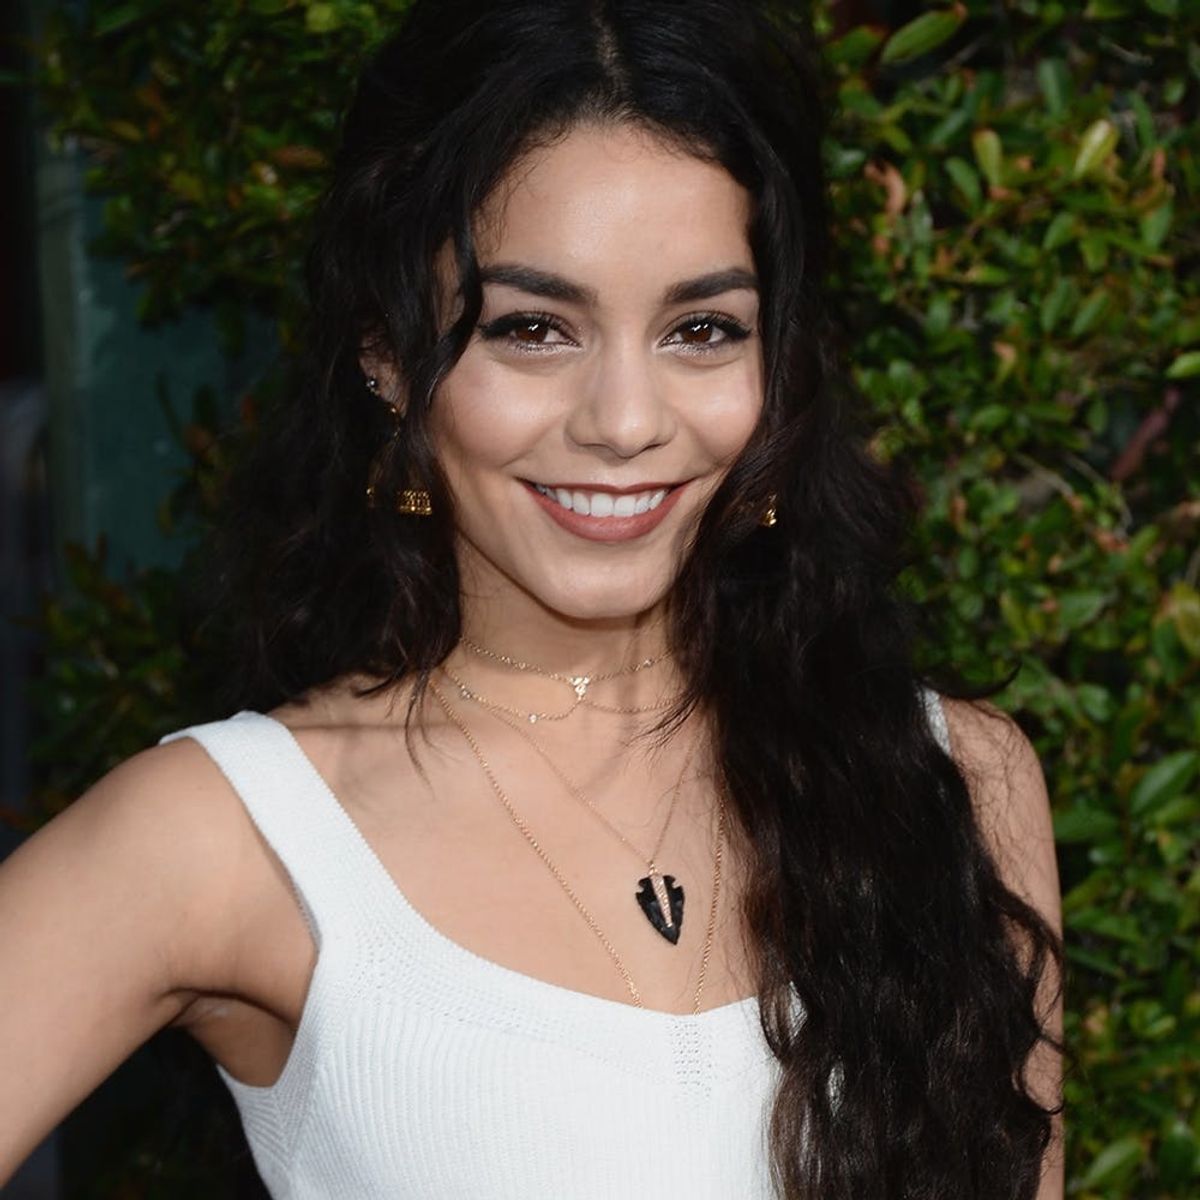 Why Vanessa Hudgens Might Have to Pay $5K for an Instagram She Posted